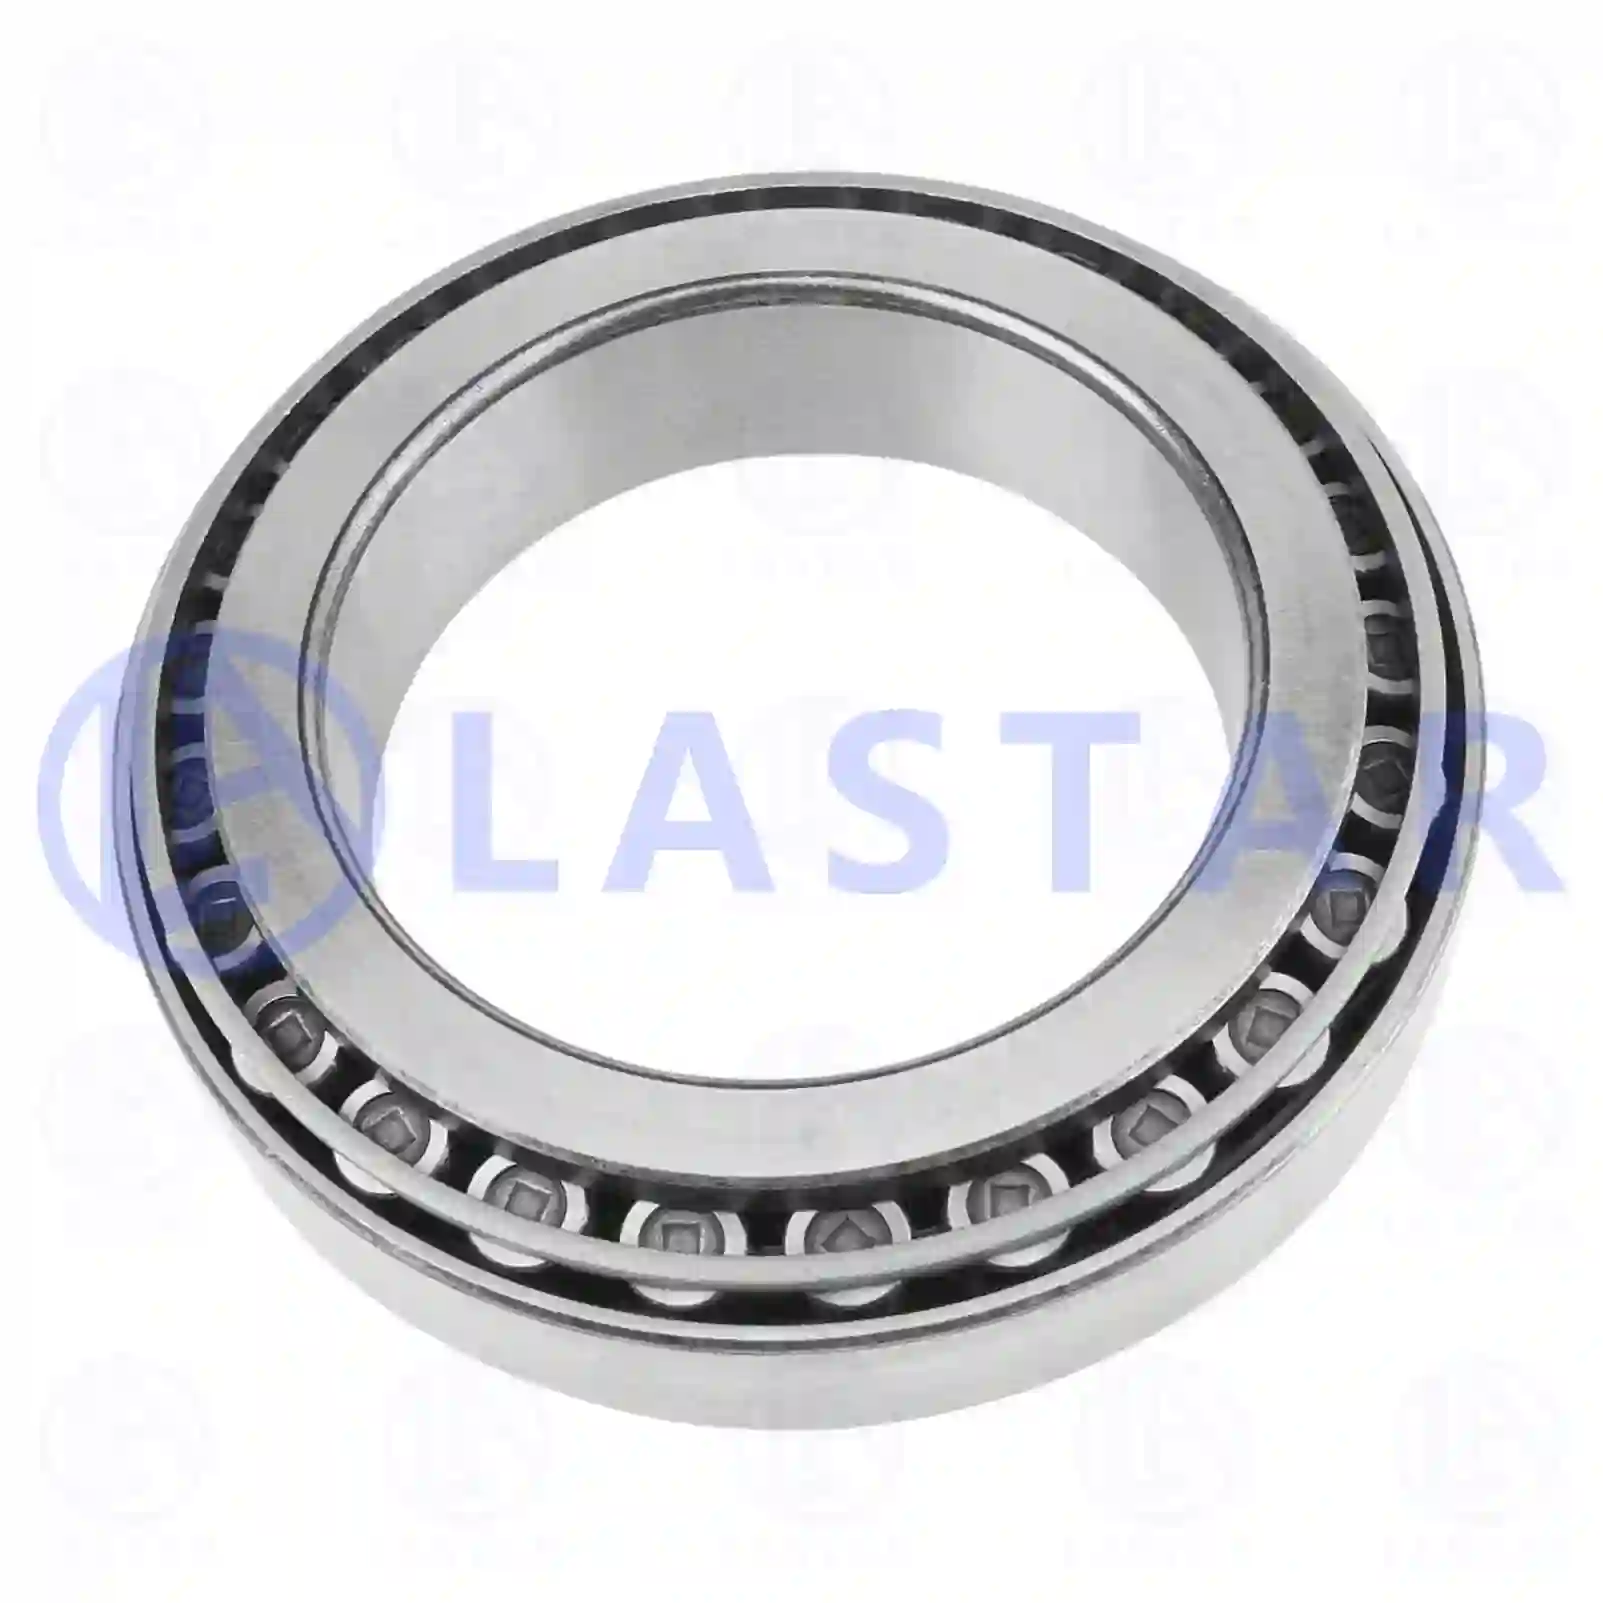 Tapered roller bearing, 77726358, 621285, 621286, 622103, 655407, AMPA012, 06324890012, 06324890064, 06324890114, 000720032019, 0019802602, 0019812602, 0029815405, 0039815105, 0039815405, 0069814705, 5000675133, 5000682662, 5010241096, 5010439224, 5010534822, 5010587011, 1408175, 1911813, 32019XQ, 324714030000, 324741030000, 20593429, 6210074, ZG02994-0008 ||  77726358 Lastar Spare Part | Truck Spare Parts, Auotomotive Spare Parts Tapered roller bearing, 77726358, 621285, 621286, 622103, 655407, AMPA012, 06324890012, 06324890064, 06324890114, 000720032019, 0019802602, 0019812602, 0029815405, 0039815105, 0039815405, 0069814705, 5000675133, 5000682662, 5010241096, 5010439224, 5010534822, 5010587011, 1408175, 1911813, 32019XQ, 324714030000, 324741030000, 20593429, 6210074, ZG02994-0008 ||  77726358 Lastar Spare Part | Truck Spare Parts, Auotomotive Spare Parts